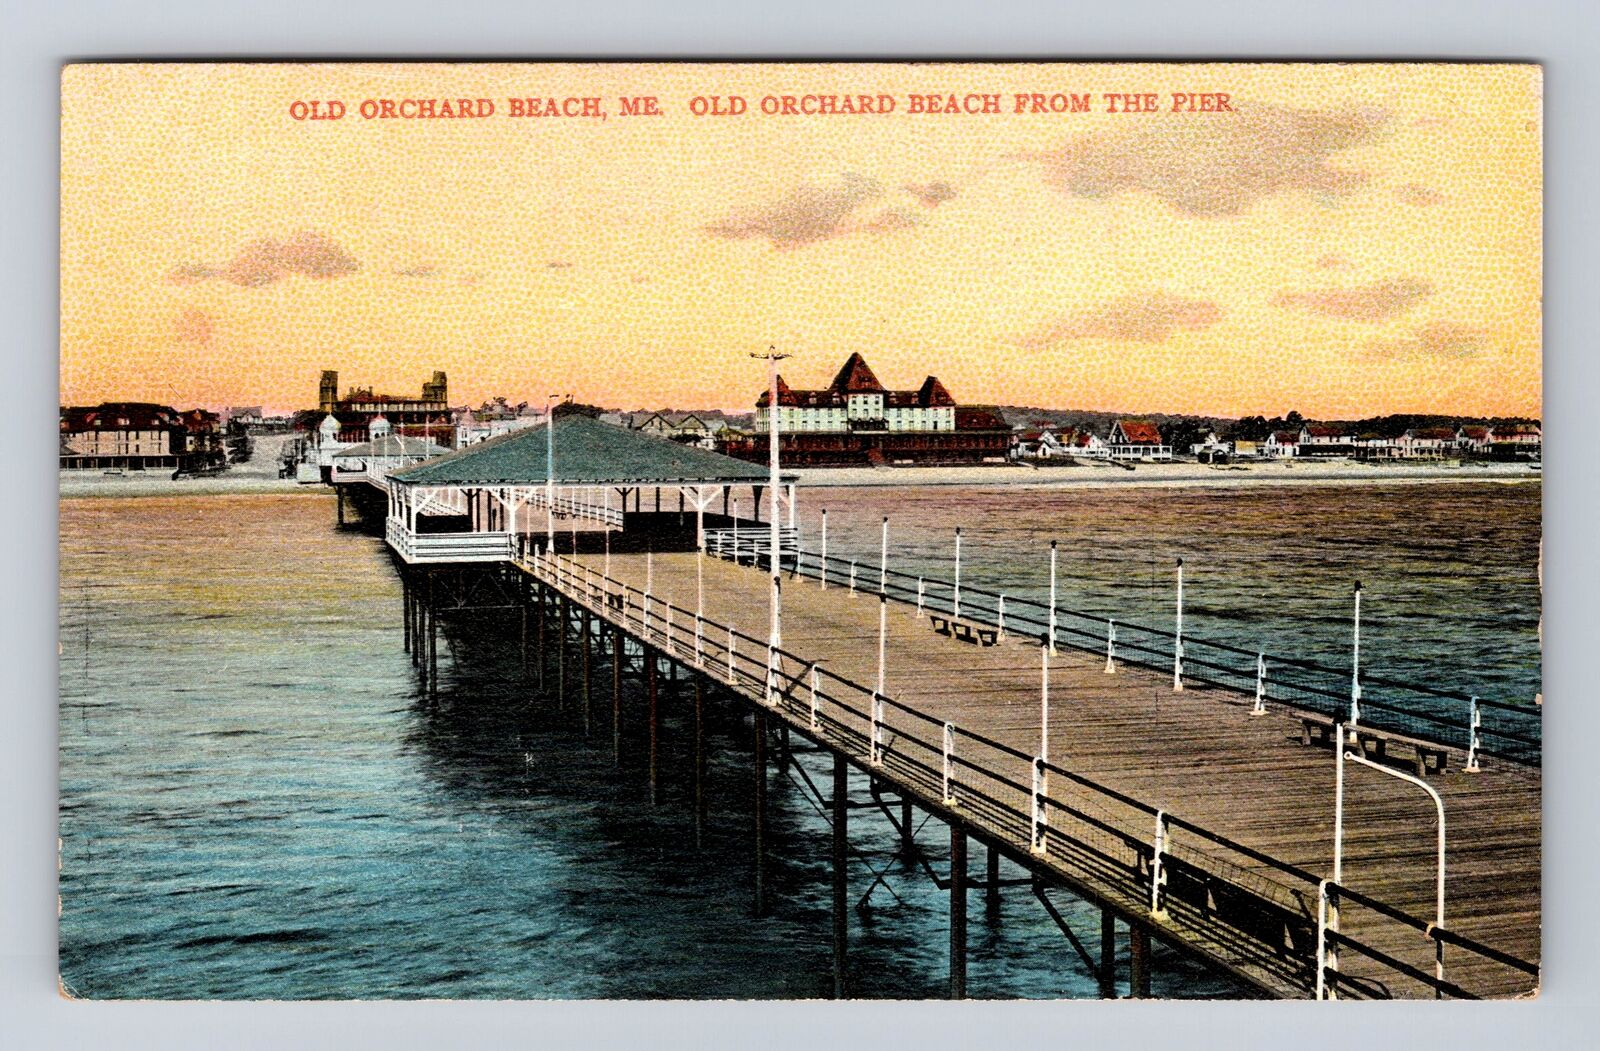 Old Orchard Beach ME-Maine, Old Orchard Beach From The Pier, Vintage Postcard